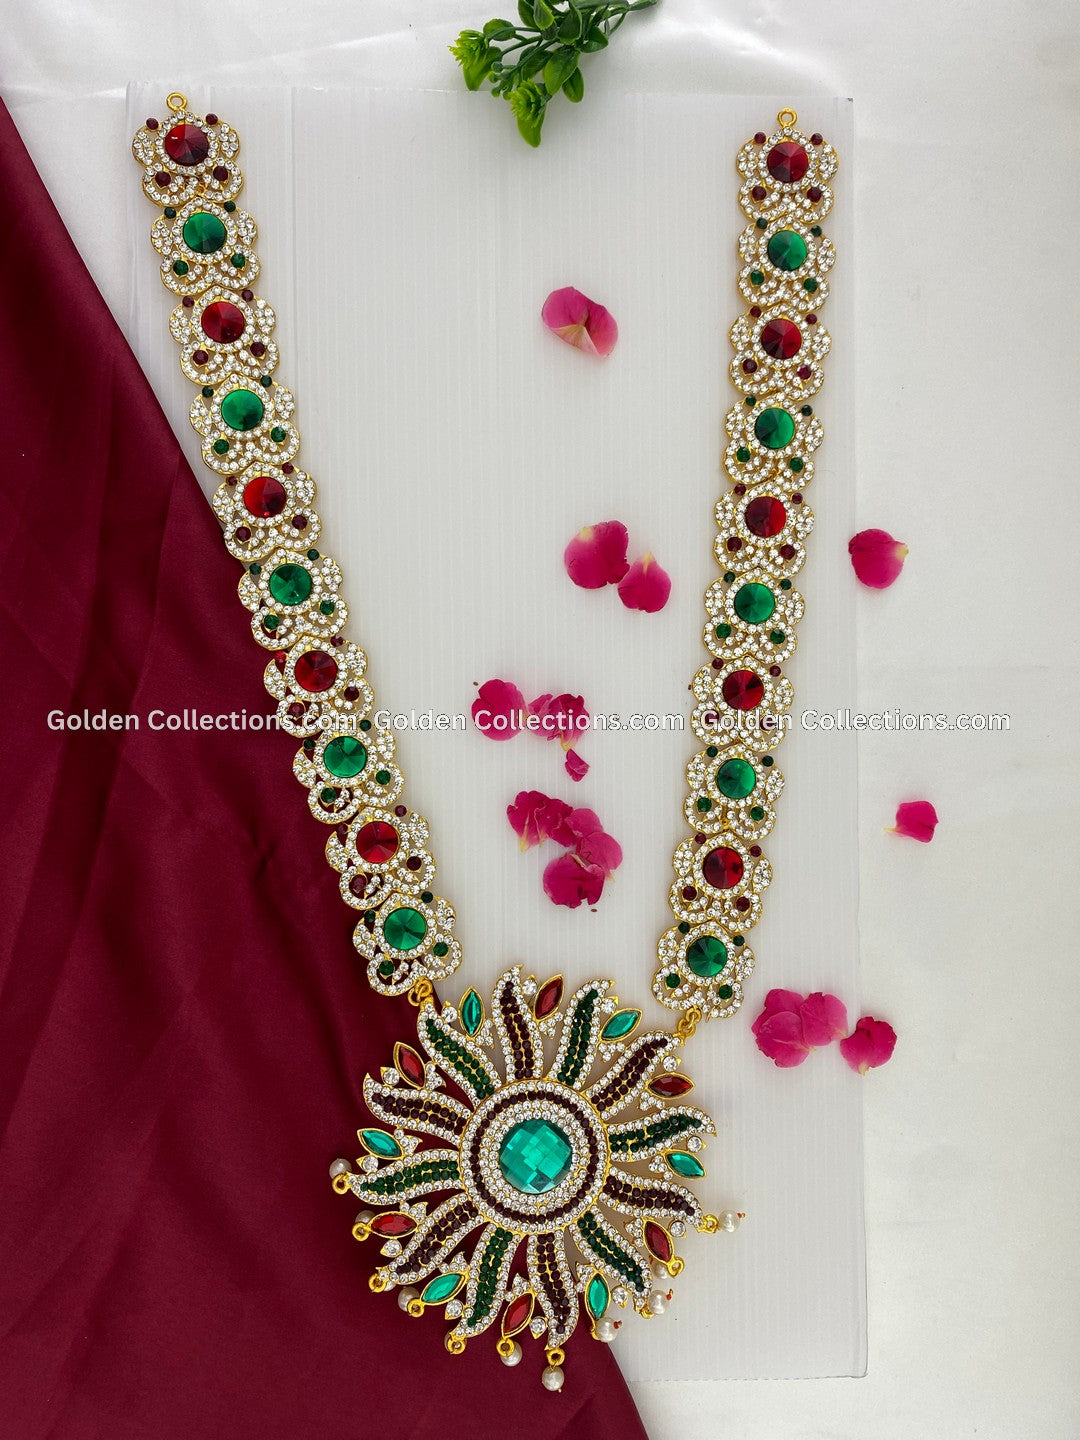 Deity Decorative Long Necklace- Divine Beauty at GoldenCollections